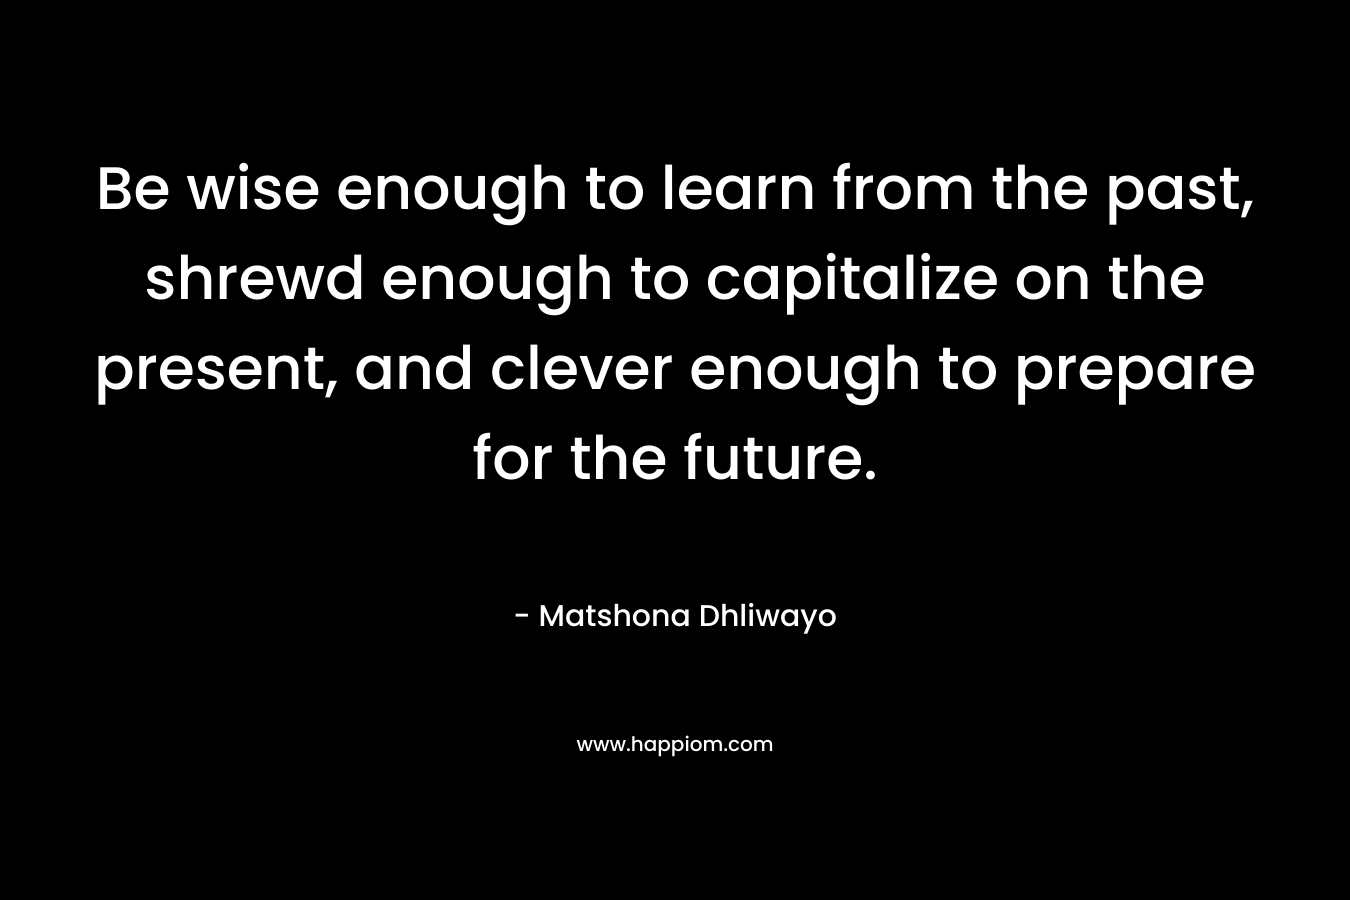 Be wise enough to learn from the past, shrewd enough to capitalize on the present, and clever enough to prepare for the future.